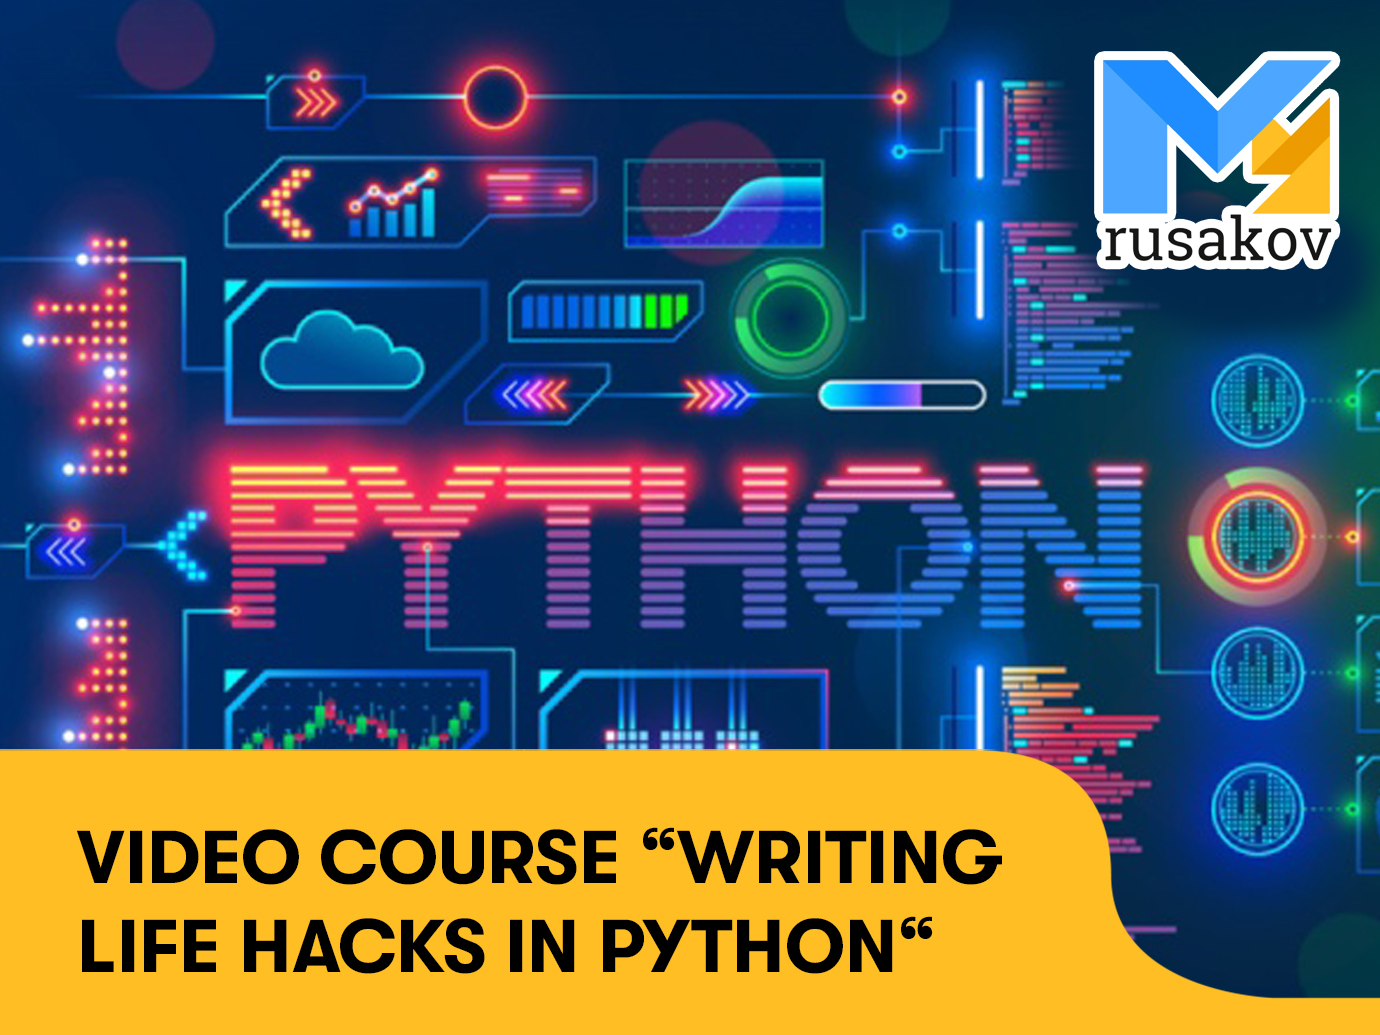 Video course “Writing life hacks in Python“